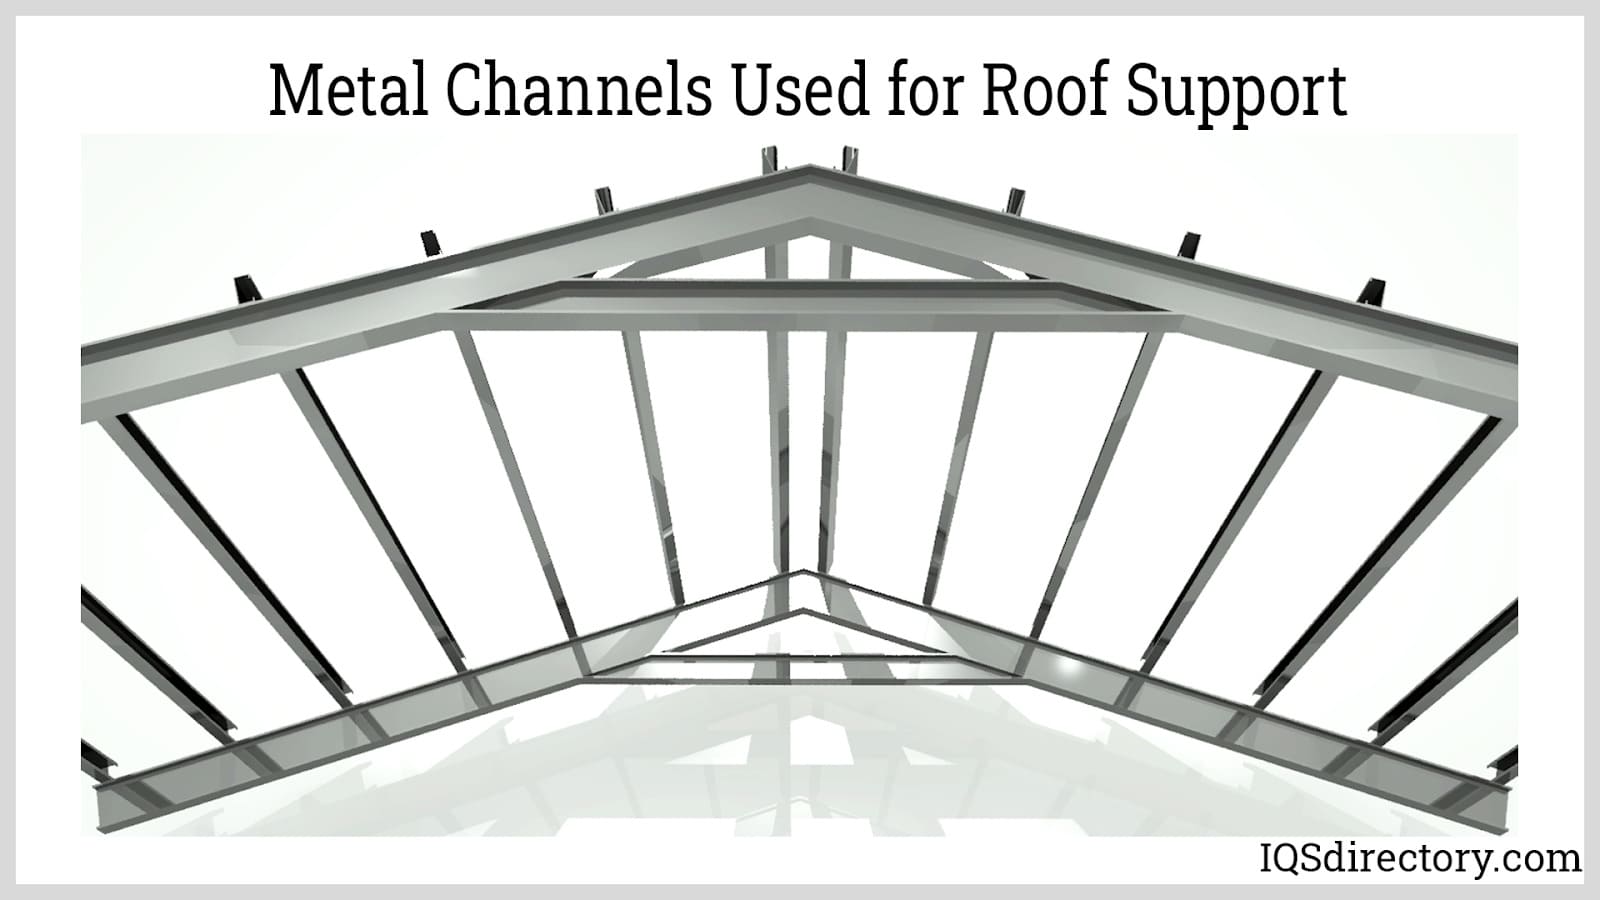 Steel Channels as Roof Supports